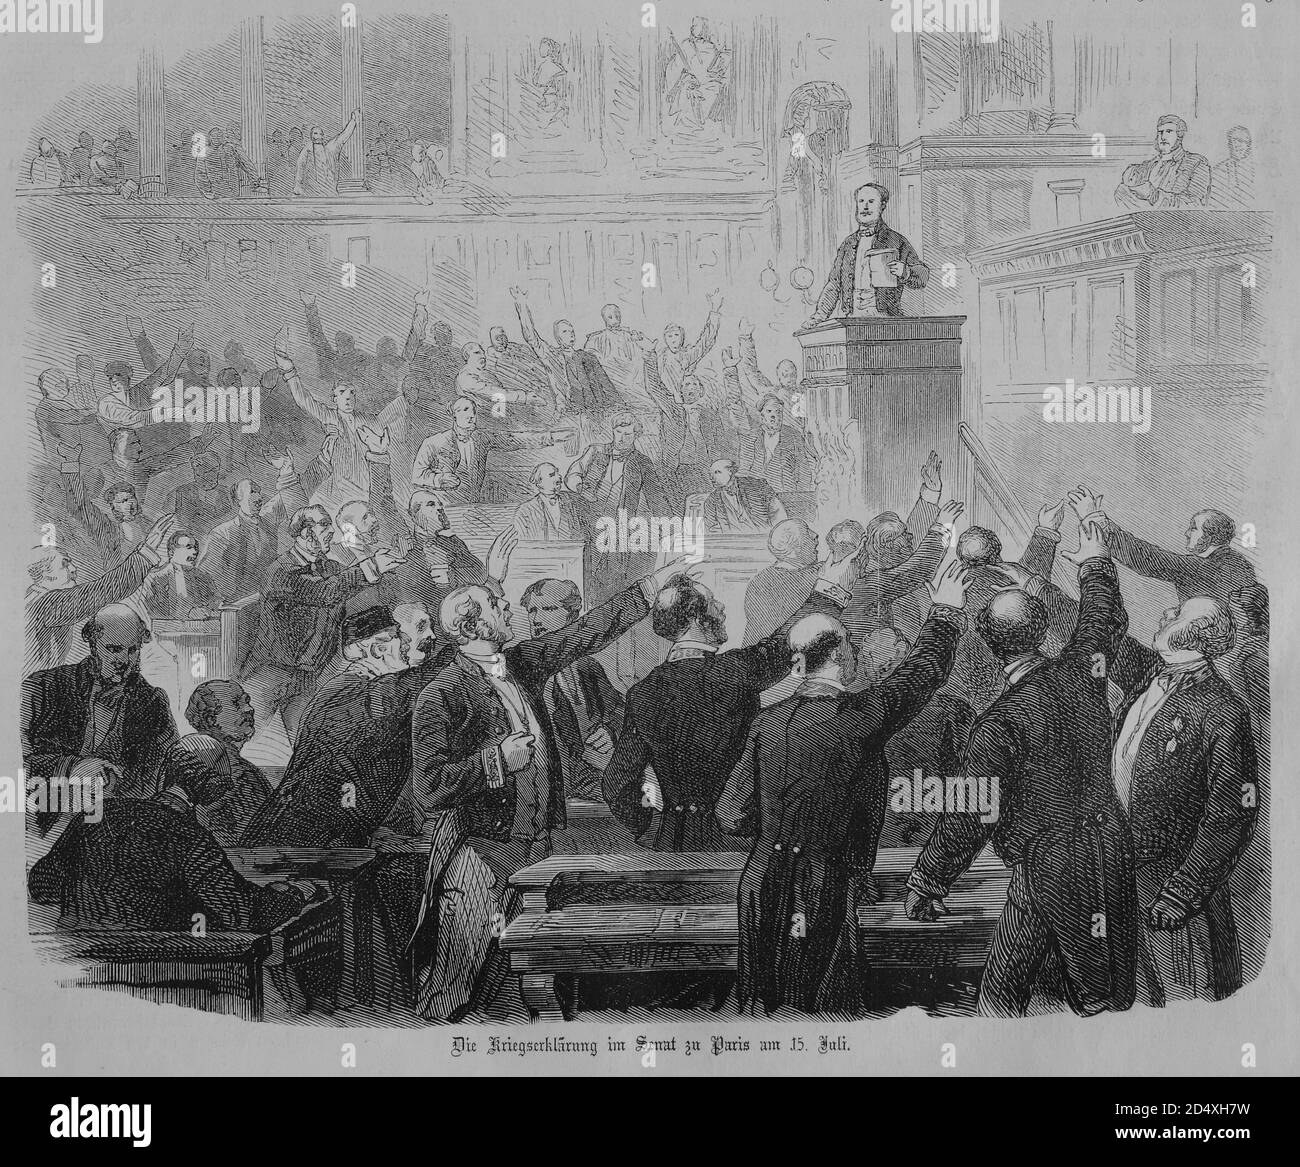 The declaration of war in the senate of Paris, July 15th 1870, illustrated war history, German - French war 1870-1871 Stock Photo